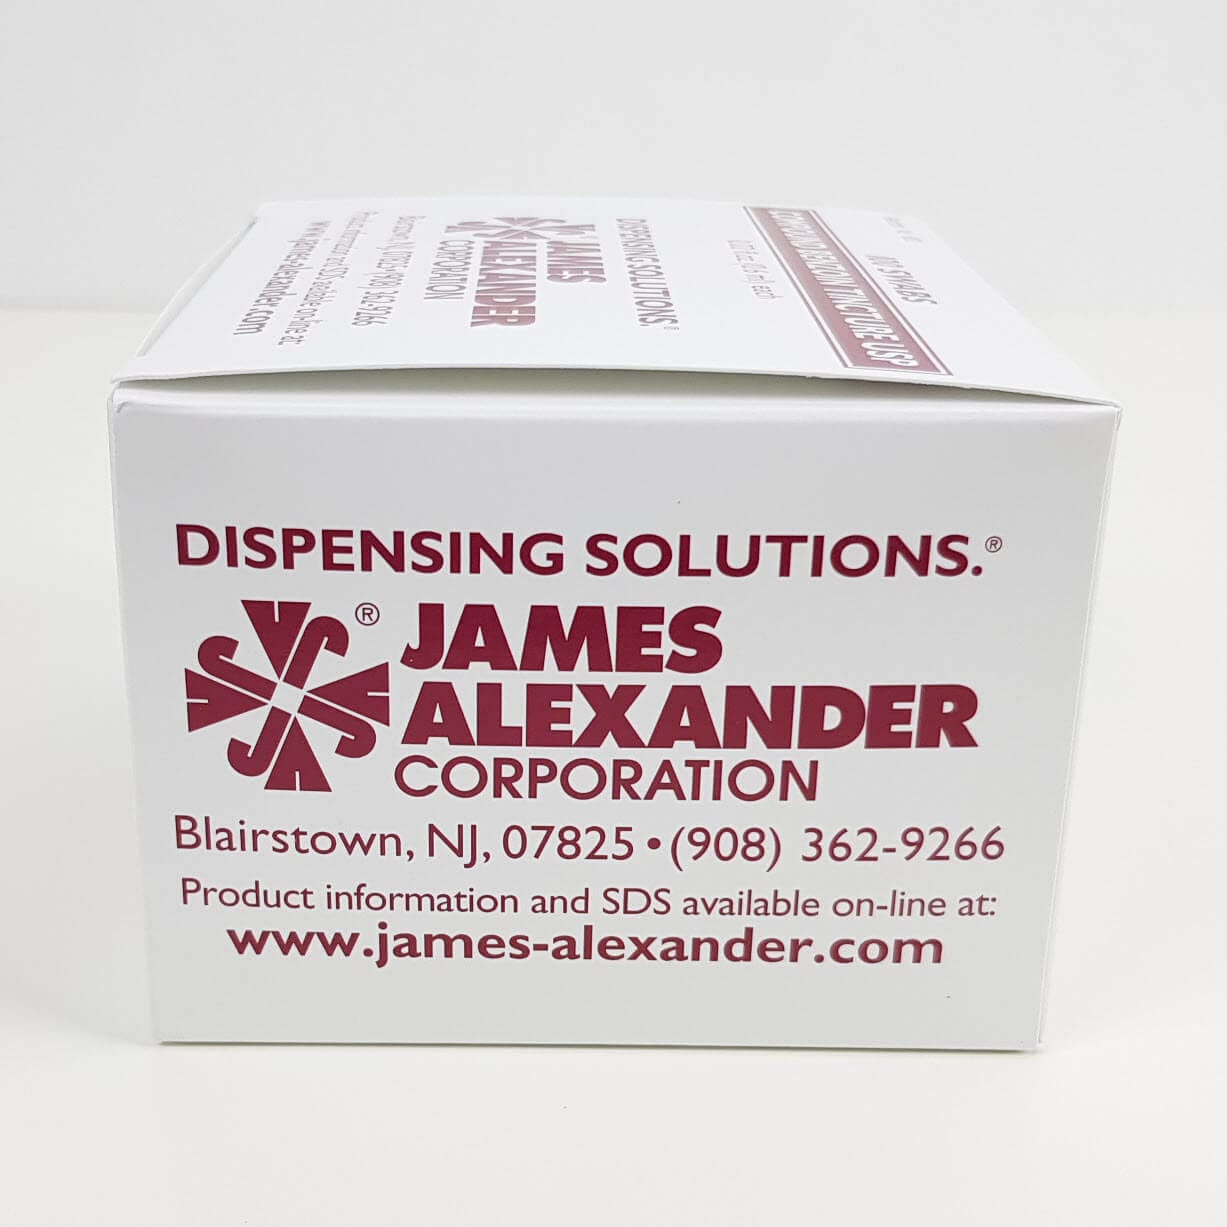 James Alexander Corp Compound Benzoin Tincture Medical Supplies - Blister Prevention